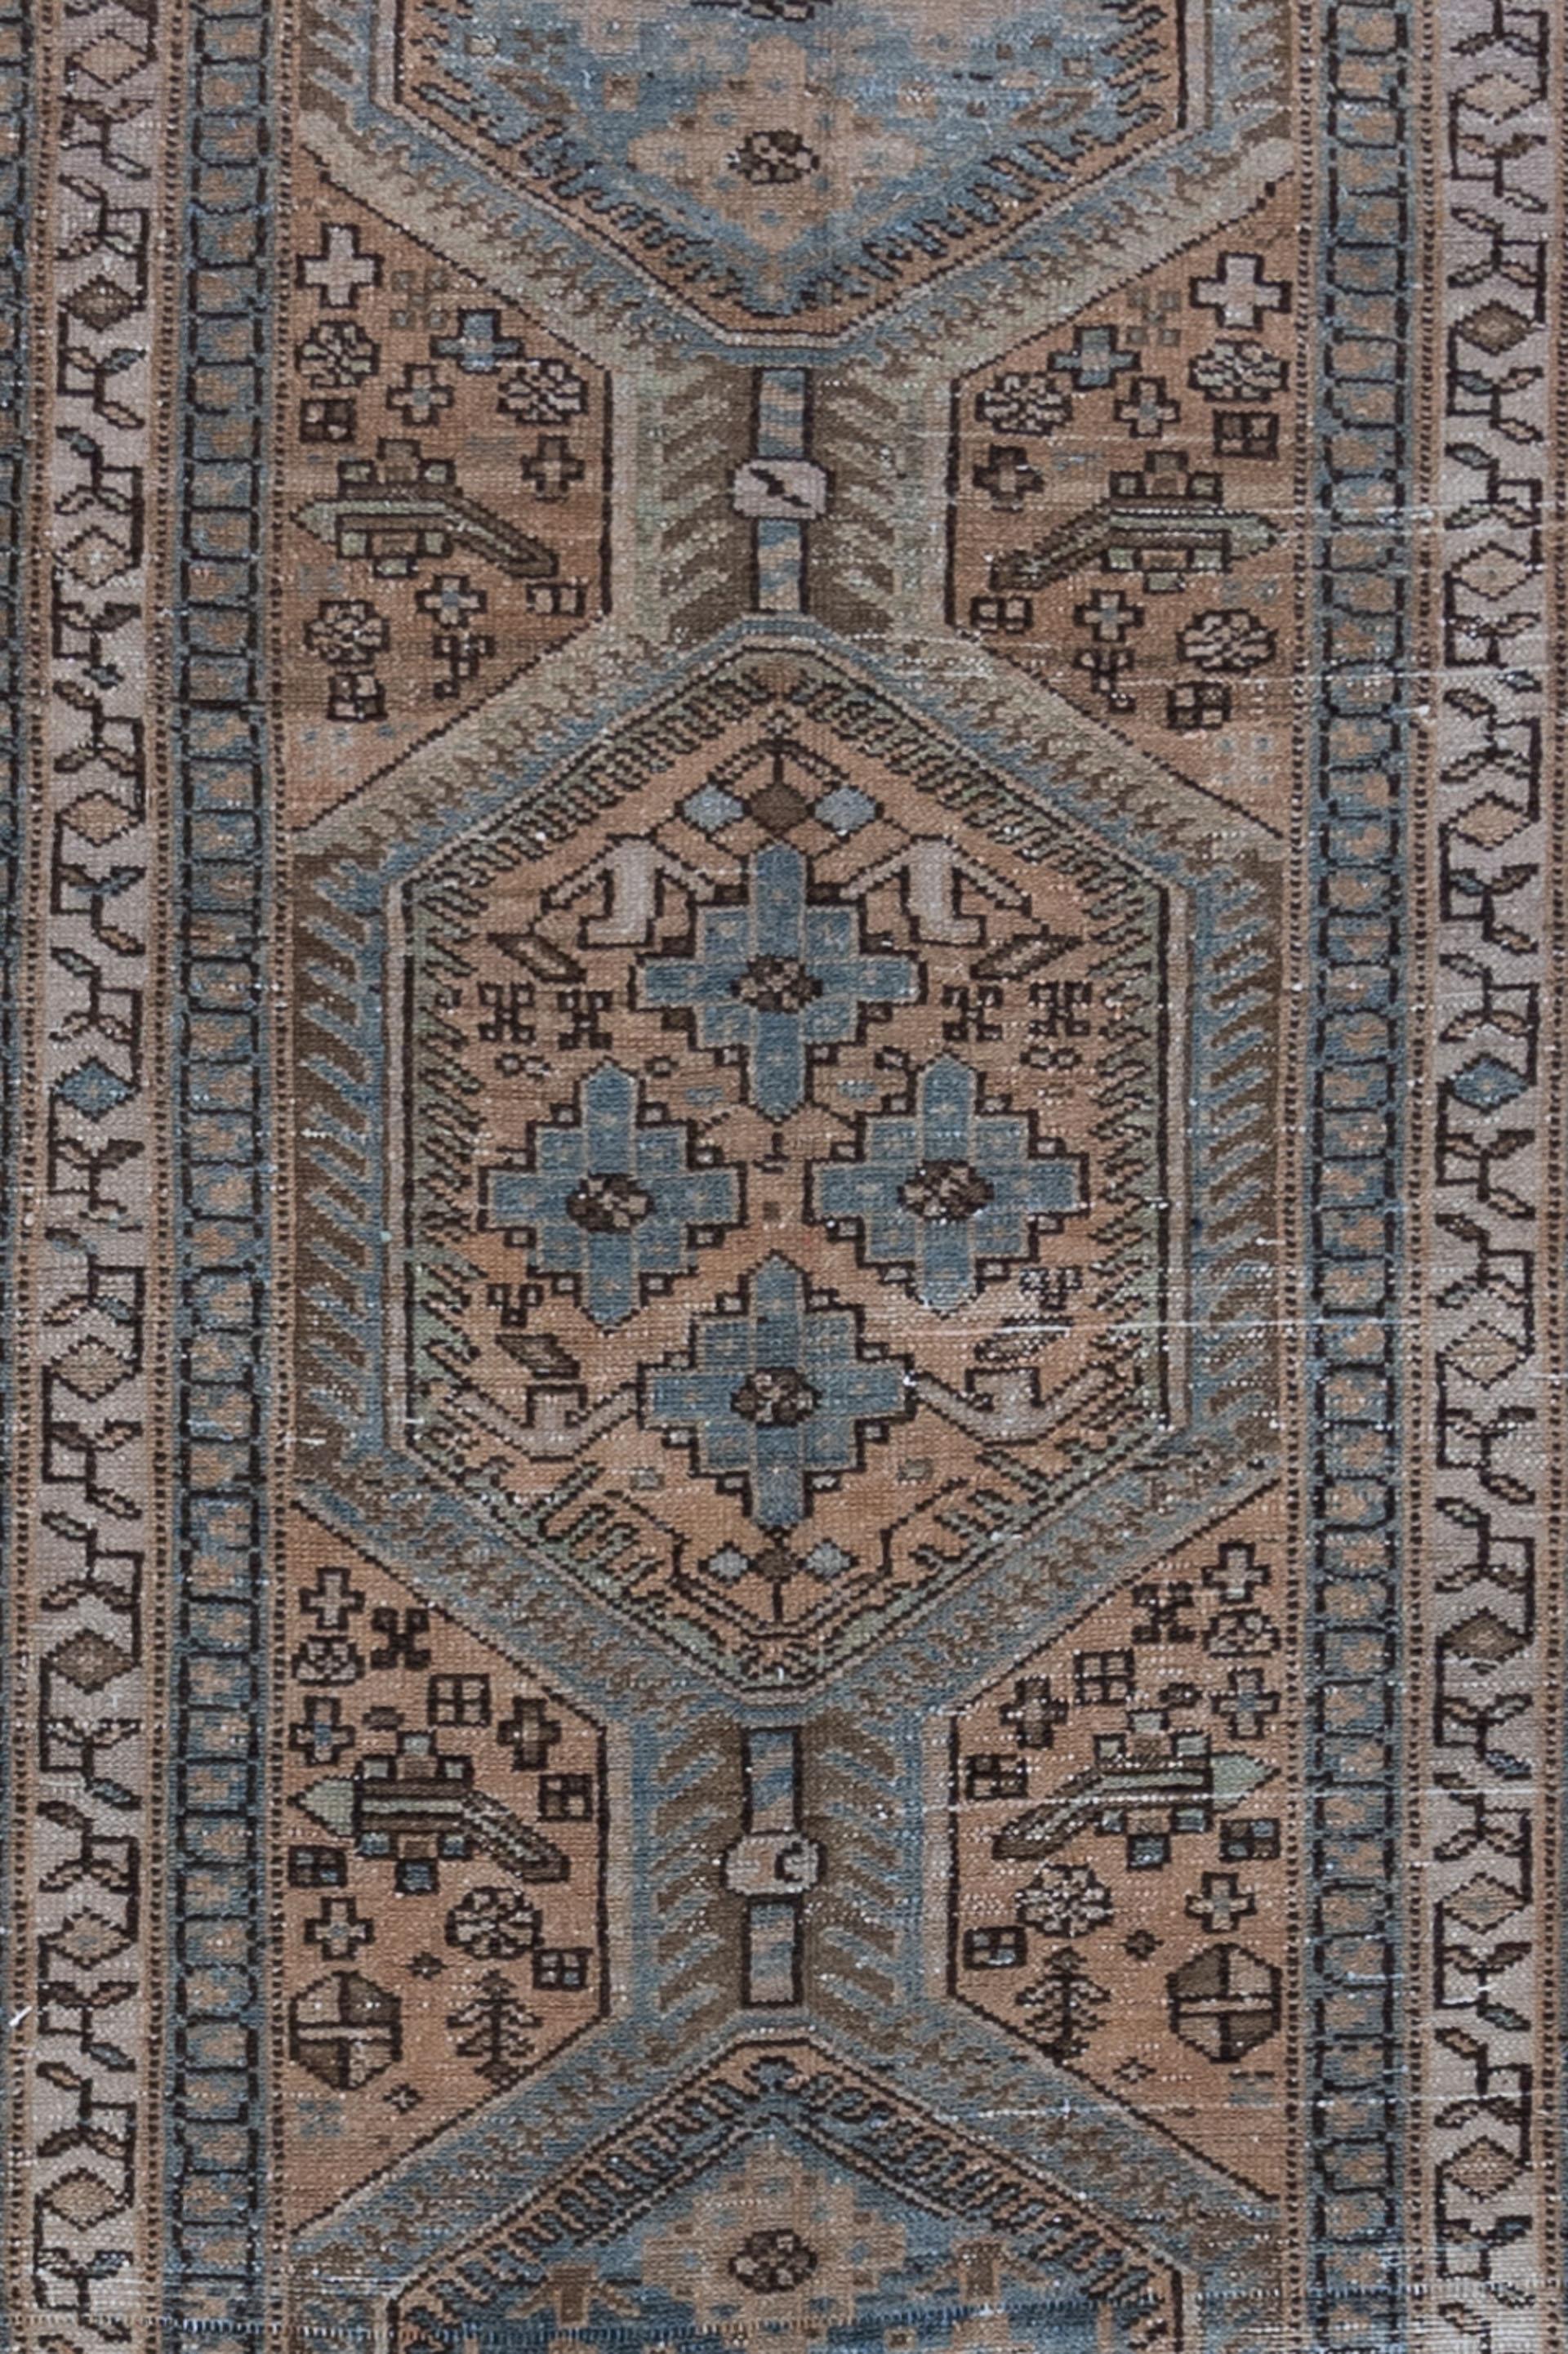 Age: Circa 1930

Colors: adobe, pink brown, blue, gray-teal, gray-brown, ivory

Pile: low

Wear Notes: 4-5

Material: wool on cotton

Vintage Persian runner in a beautiful color scheme of warm but faded earthy tones and a contrasting blue.